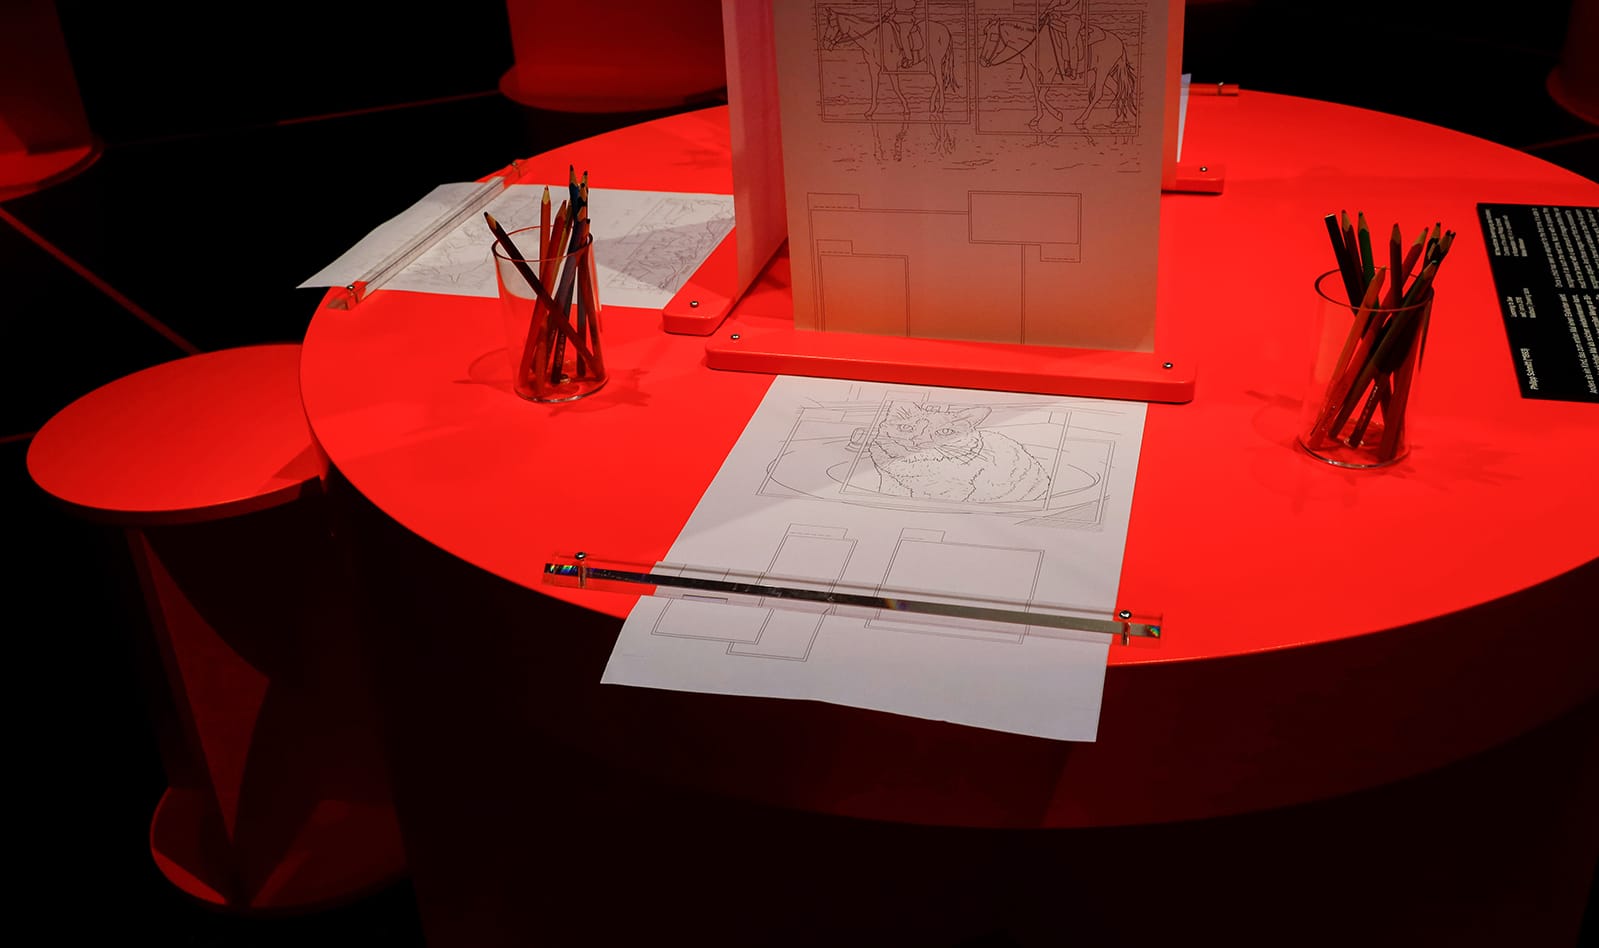 A red table with three seats, each with a roll of coloring pages in front of them. It is an art exhibit at Deutsches Hygiene Museum Dresden